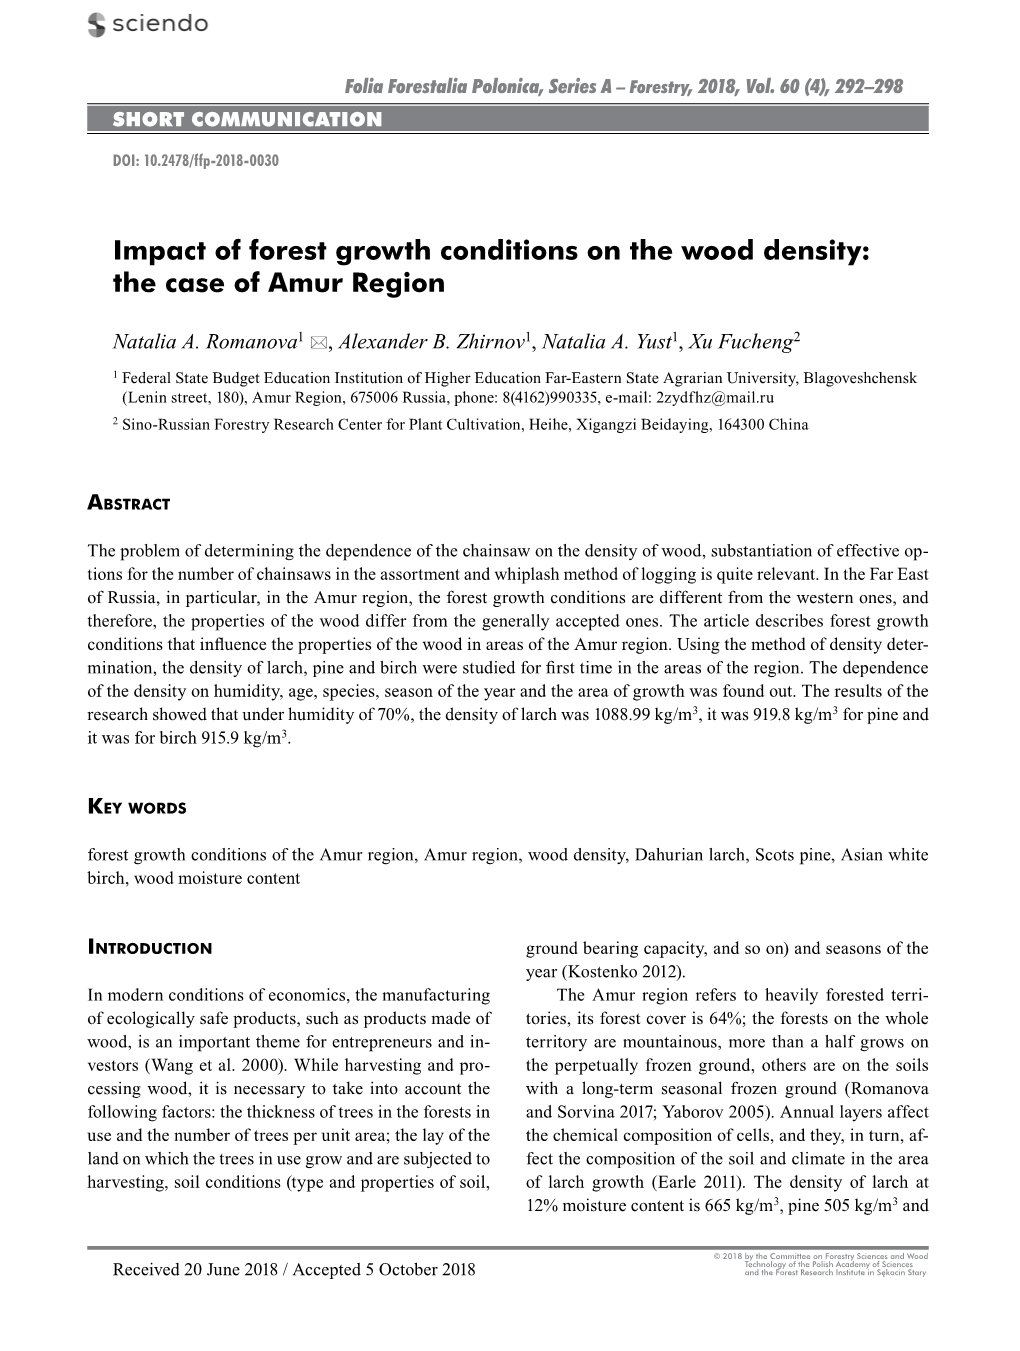 Impact of Forest Growth Conditions on the Wood Density: the Case of Amur Region